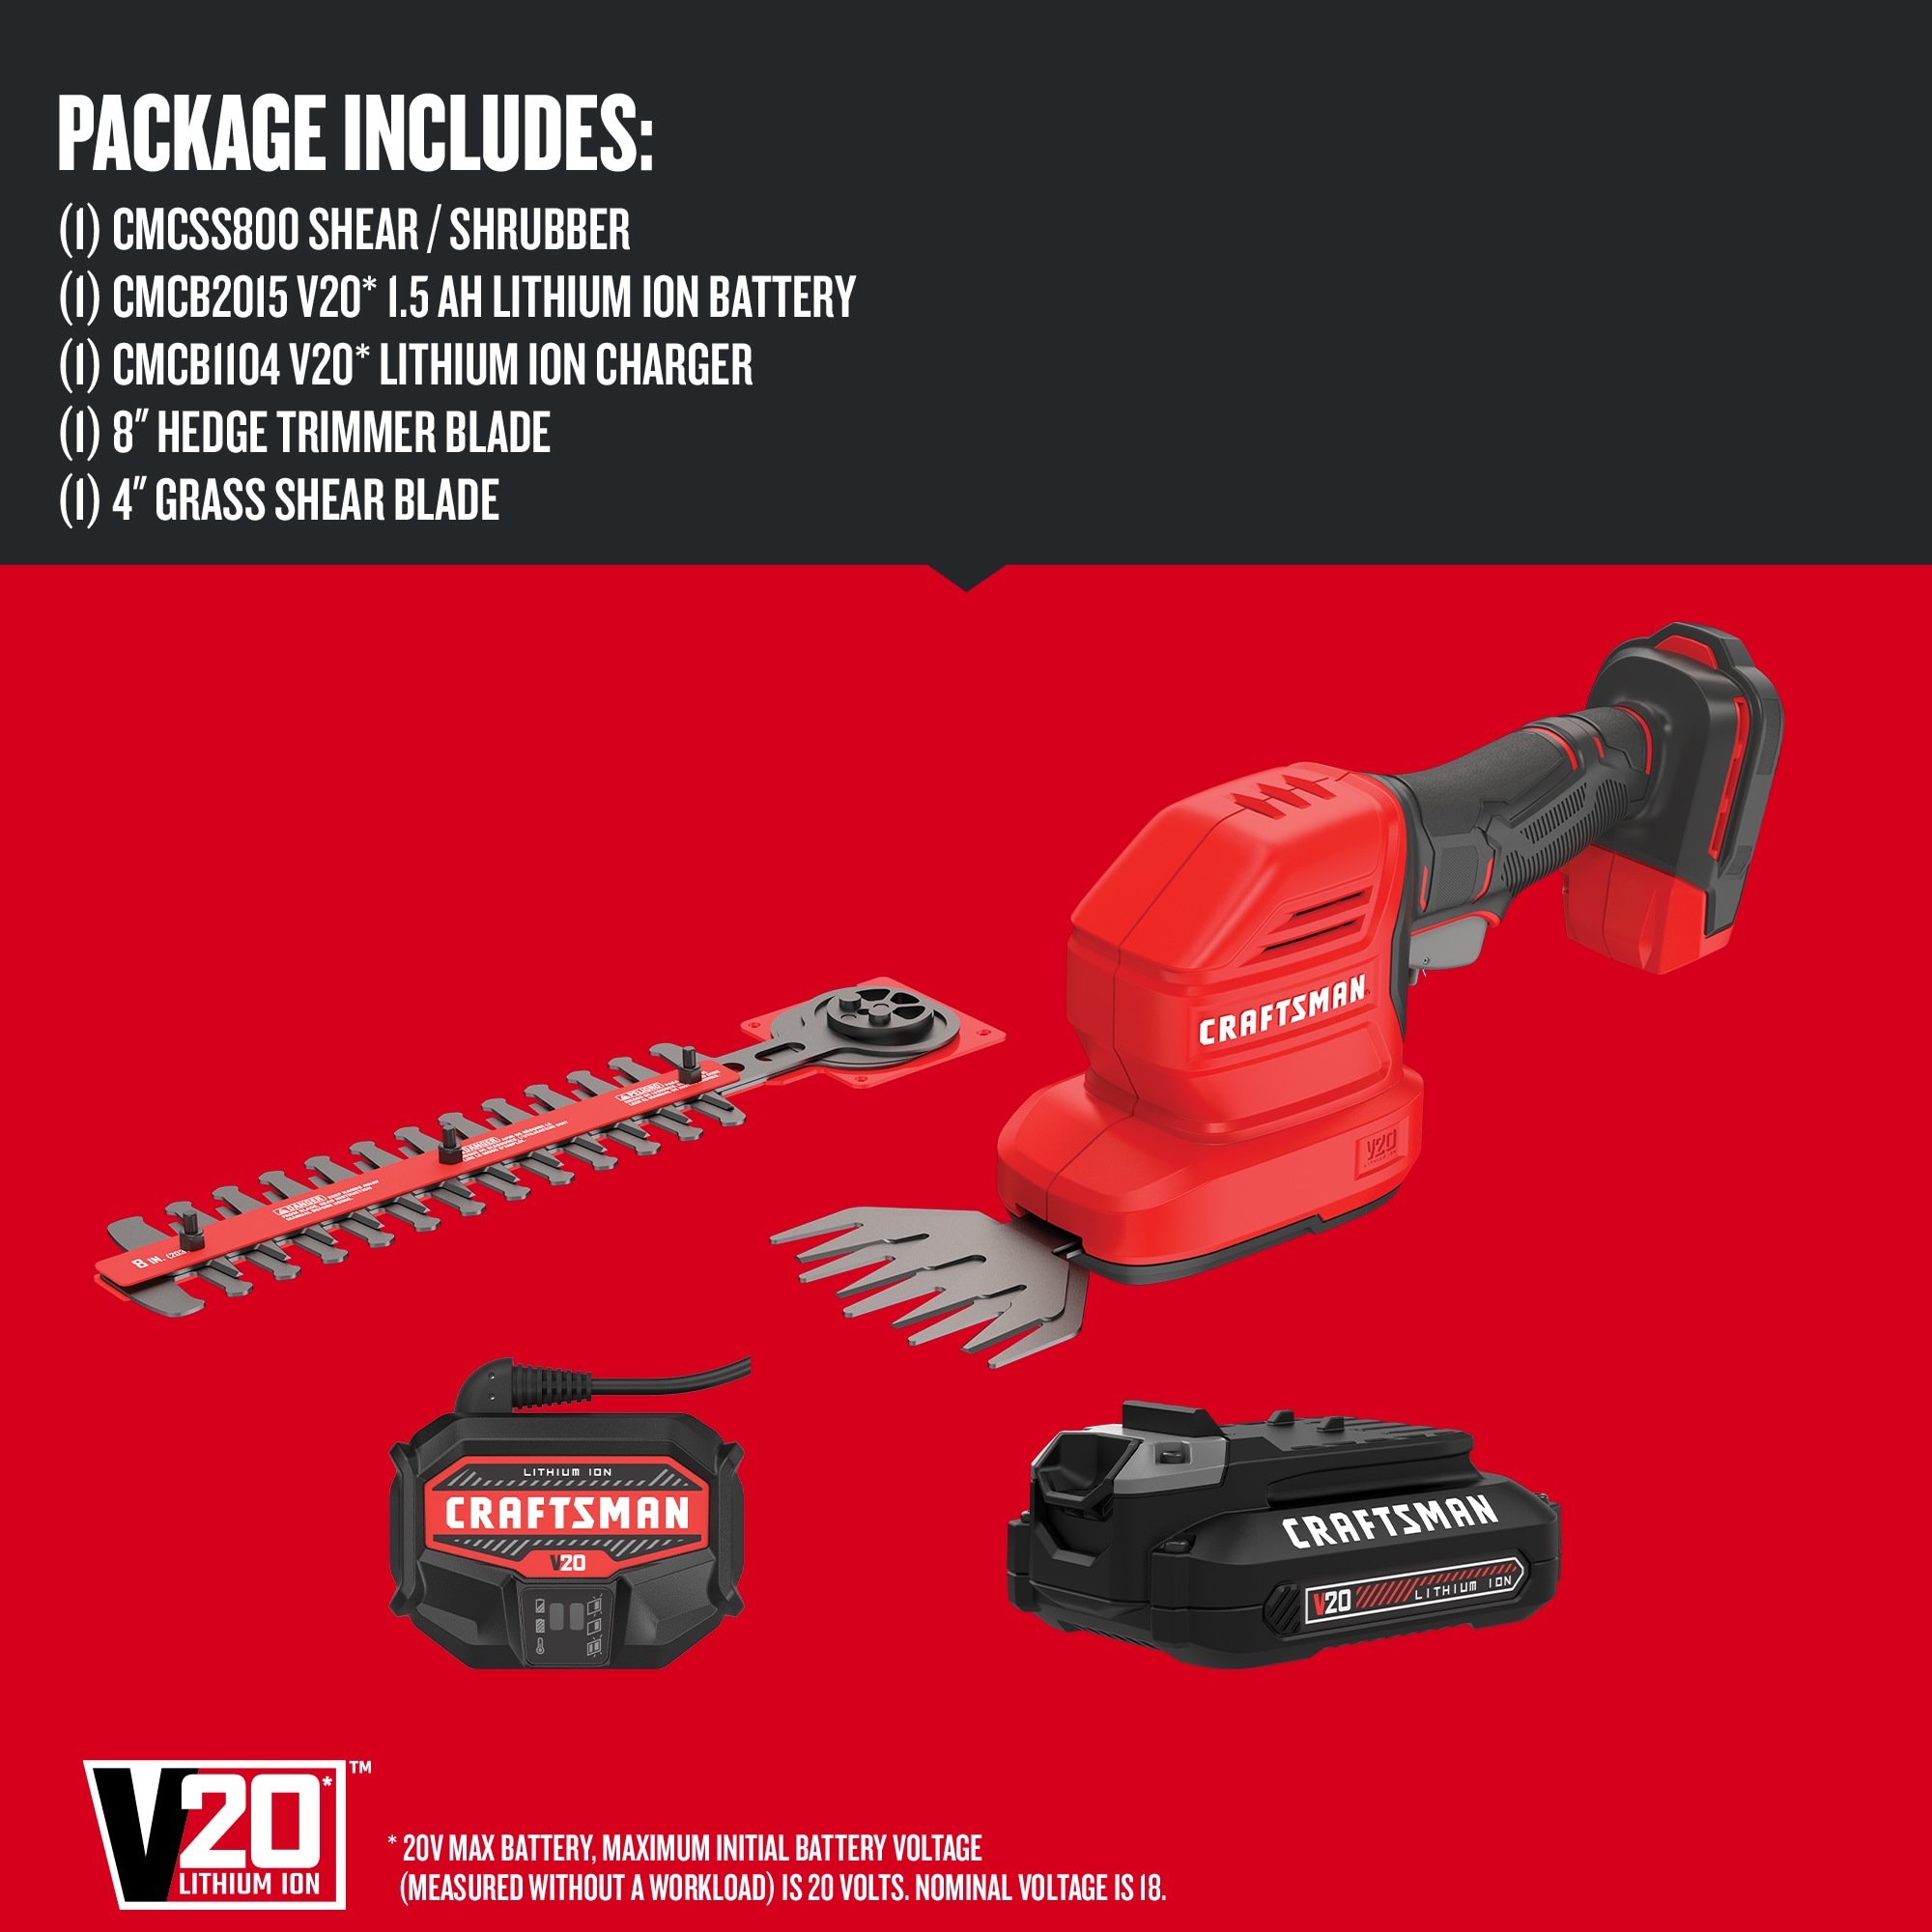 BLACK+DECKER LHT218C1 20V MAX Cordless Battery Powered Hedge Trimmer Kit  with (1) 1.5Ah Battery & Charger